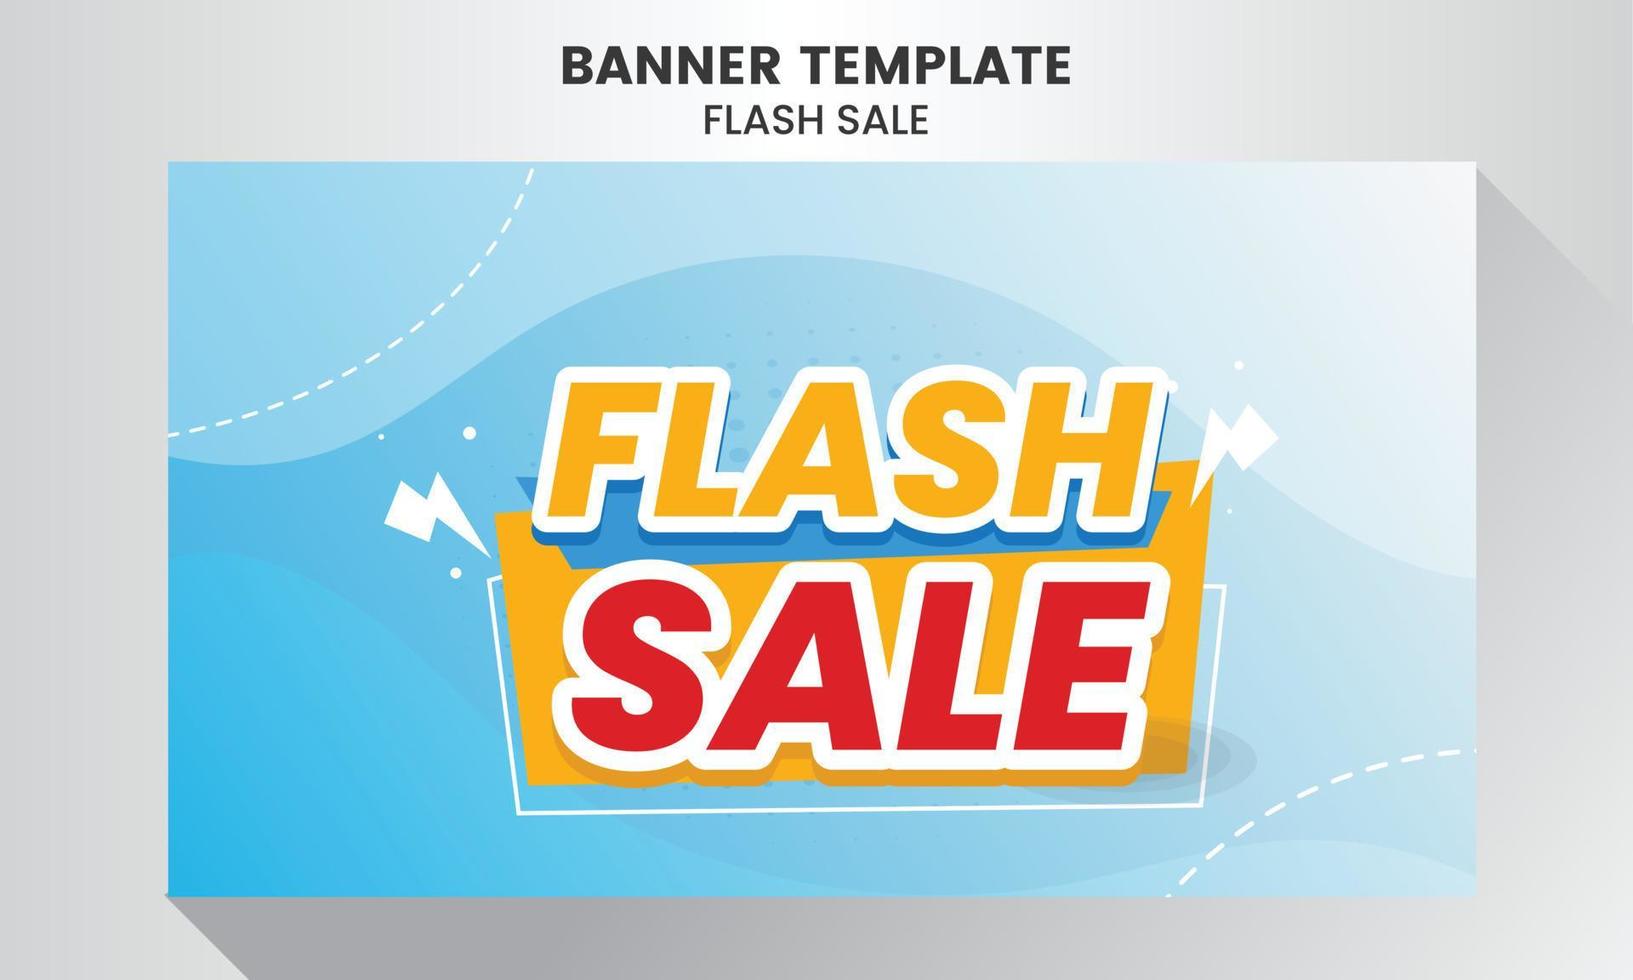 Flash Sale Shopping Poster or banner with 3D text.Flash Sales banner template design. Special Offer Flash Sale campaign or promotion. vector